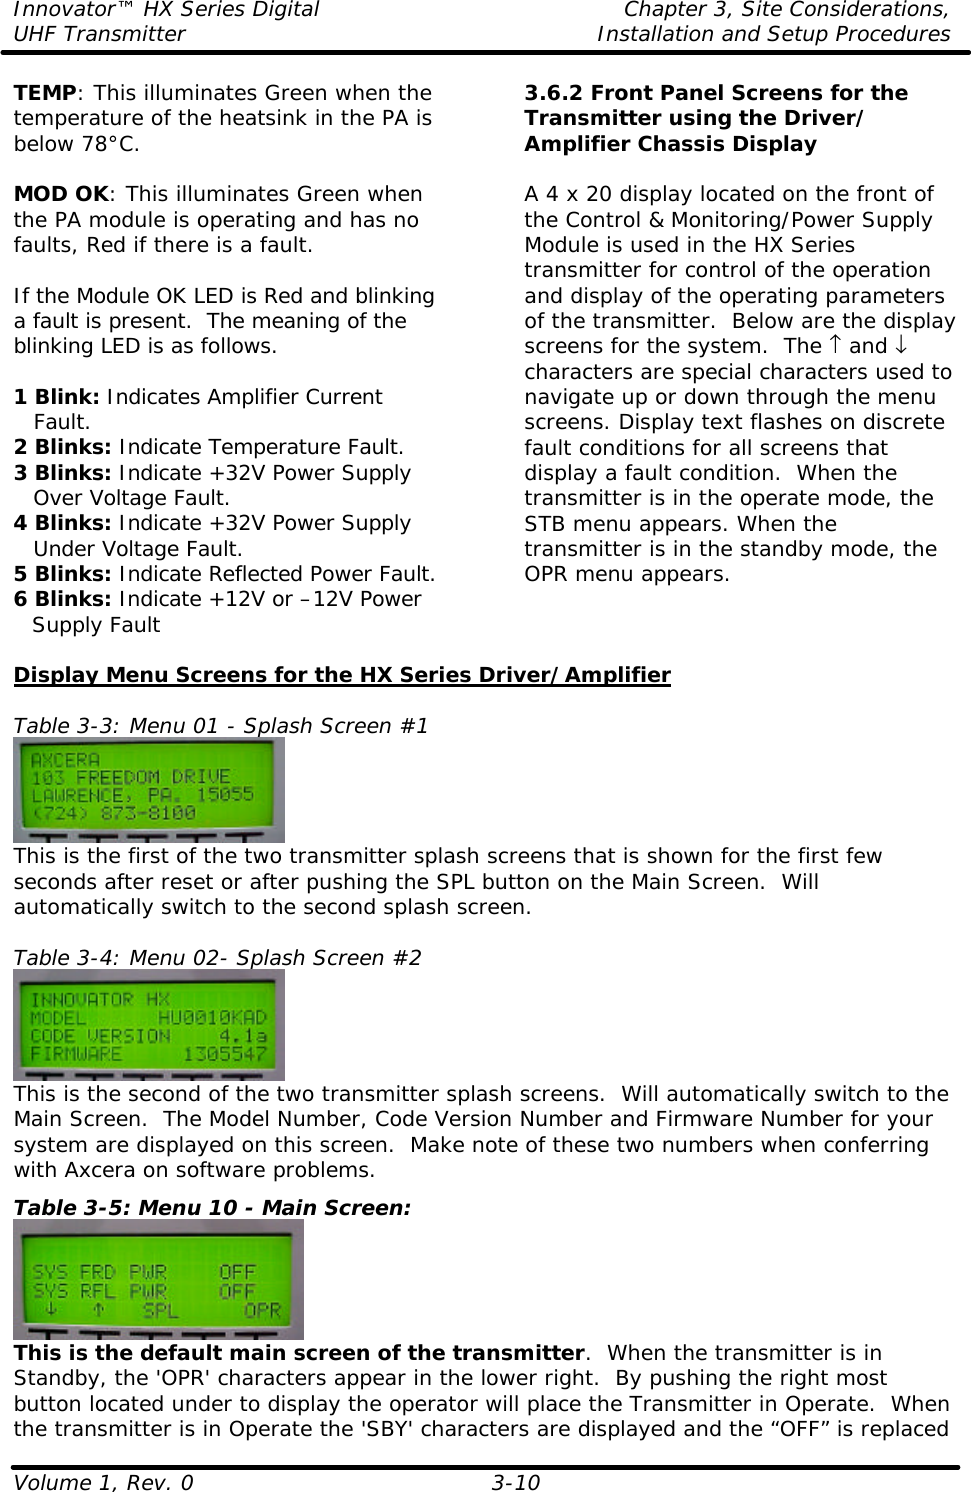 Innovator™ HX Series Digital    Chapter 3, Site Considerations, UHF Transmitter Installation and Setup Procedures Volume 1, Rev. 0  3-10 TEMP: This illuminates Green when the temperature of the heatsink in the PA is below 78°C.  MOD OK: This illuminates Green when the PA module is operating and has no faults, Red if there is a fault.  If the Module OK LED is Red and blinking a fault is present.  The meaning of the blinking LED is as follows.  1 Blink: Indicates Amplifier Current  Fault. 2 Blinks: Indicate Temperature Fault. 3 Blinks: Indicate +32V Power Supply  Over Voltage Fault. 4 Blinks: Indicate +32V Power Supply  Under Voltage Fault. 5 Blinks: Indicate Reflected Power Fault. 6 Blinks: Indicate +12V or –12V Power Supply Fault 3.6.2 Front Panel Screens for the Transmitter using the Driver/ Amplifier Chassis Display  A 4 x 20 display located on the front of the Control &amp; Monitoring/Power Supply Module is used in the HX Series transmitter for control of the operation and display of the operating parameters of the transmitter.  Below are the display screens for the system.  The ↑ and ↓ characters are special characters used to navigate up or down through the menu screens. Display text flashes on discrete fault conditions for all screens that display a fault condition.  When the transmitter is in the operate mode, the STB menu appears. When the transmitter is in the standby mode, the OPR menu appears.  Display Menu Screens for the HX Series Driver/Amplifier  Table 3-3: Menu 01 - Splash Screen #1  This is the first of the two transmitter splash screens that is shown for the first few seconds after reset or after pushing the SPL button on the Main Screen.  Will automatically switch to the second splash screen.  Table 3-4: Menu 02- Splash Screen #2  This is the second of the two transmitter splash screens.  Will automatically switch to the Main Screen.  The Model Number, Code Version Number and Firmware Number for your system are displayed on this screen.  Make note of these two numbers when conferring with Axcera on software problems. Table 3-5: Menu 10 - Main Screen:  This is the default main screen of the transmitter.  When the transmitter is in Standby, the &apos;OPR&apos; characters appear in the lower right.  By pushing the right most button located under to display the operator will place the Transmitter in Operate.  When the transmitter is in Operate the &apos;SBY&apos; characters are displayed and the “OFF” is replaced 